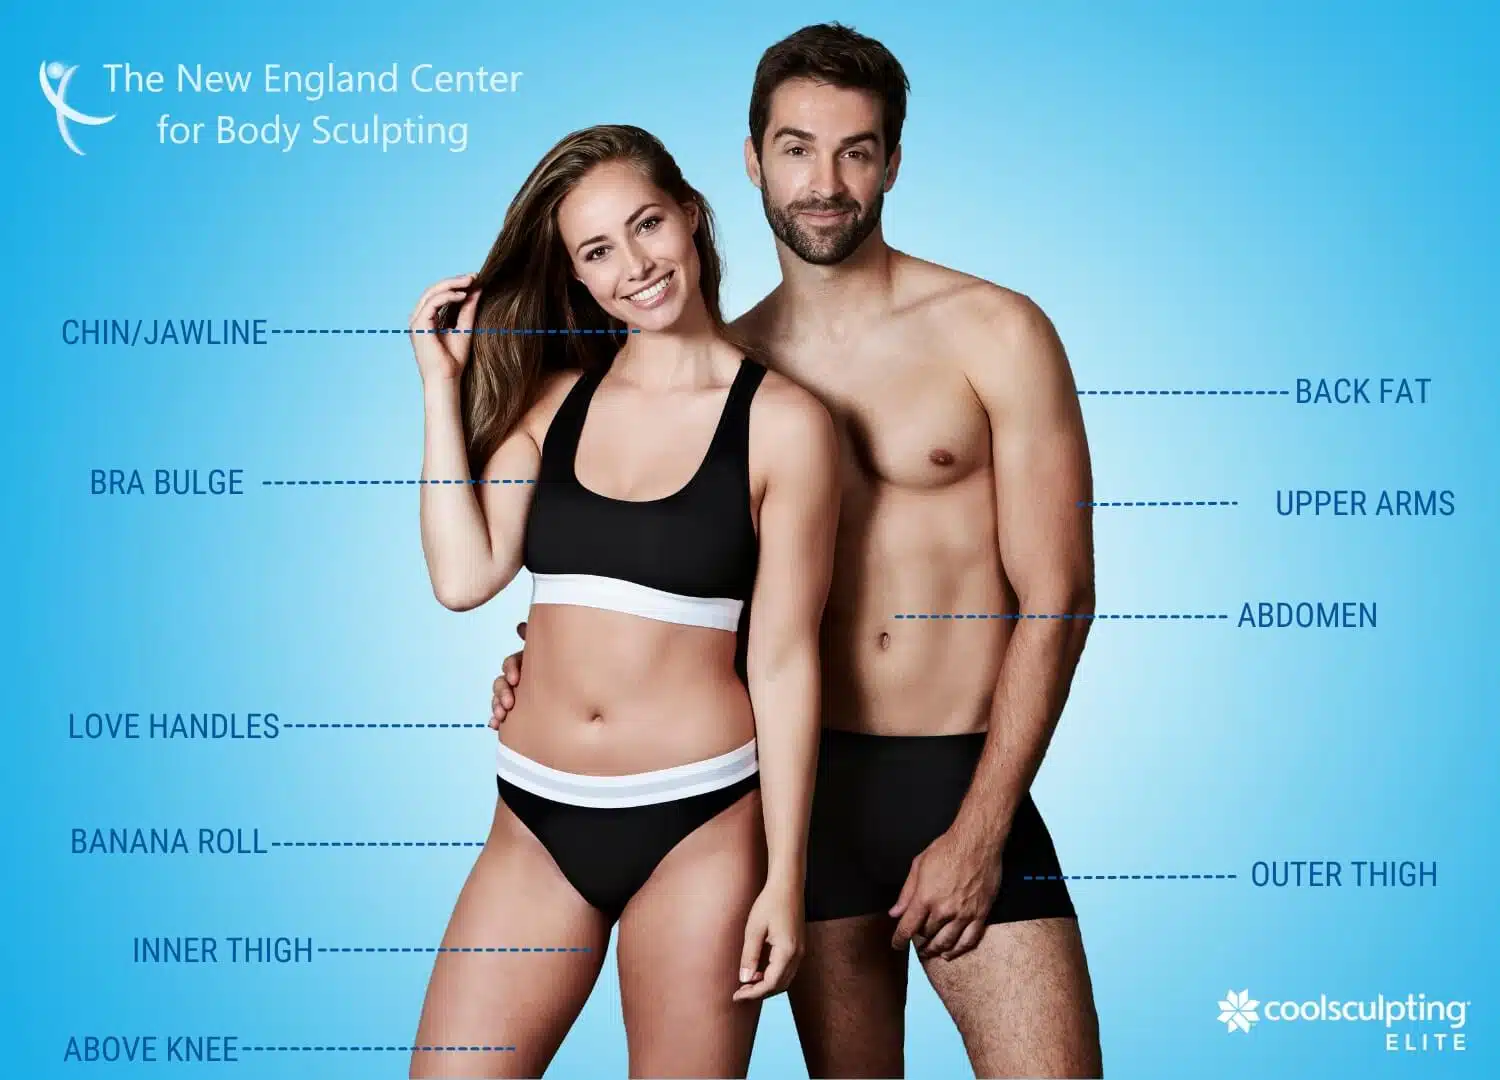 New England Center for Body Sculpting's CoolSculpting Elite treatment areas